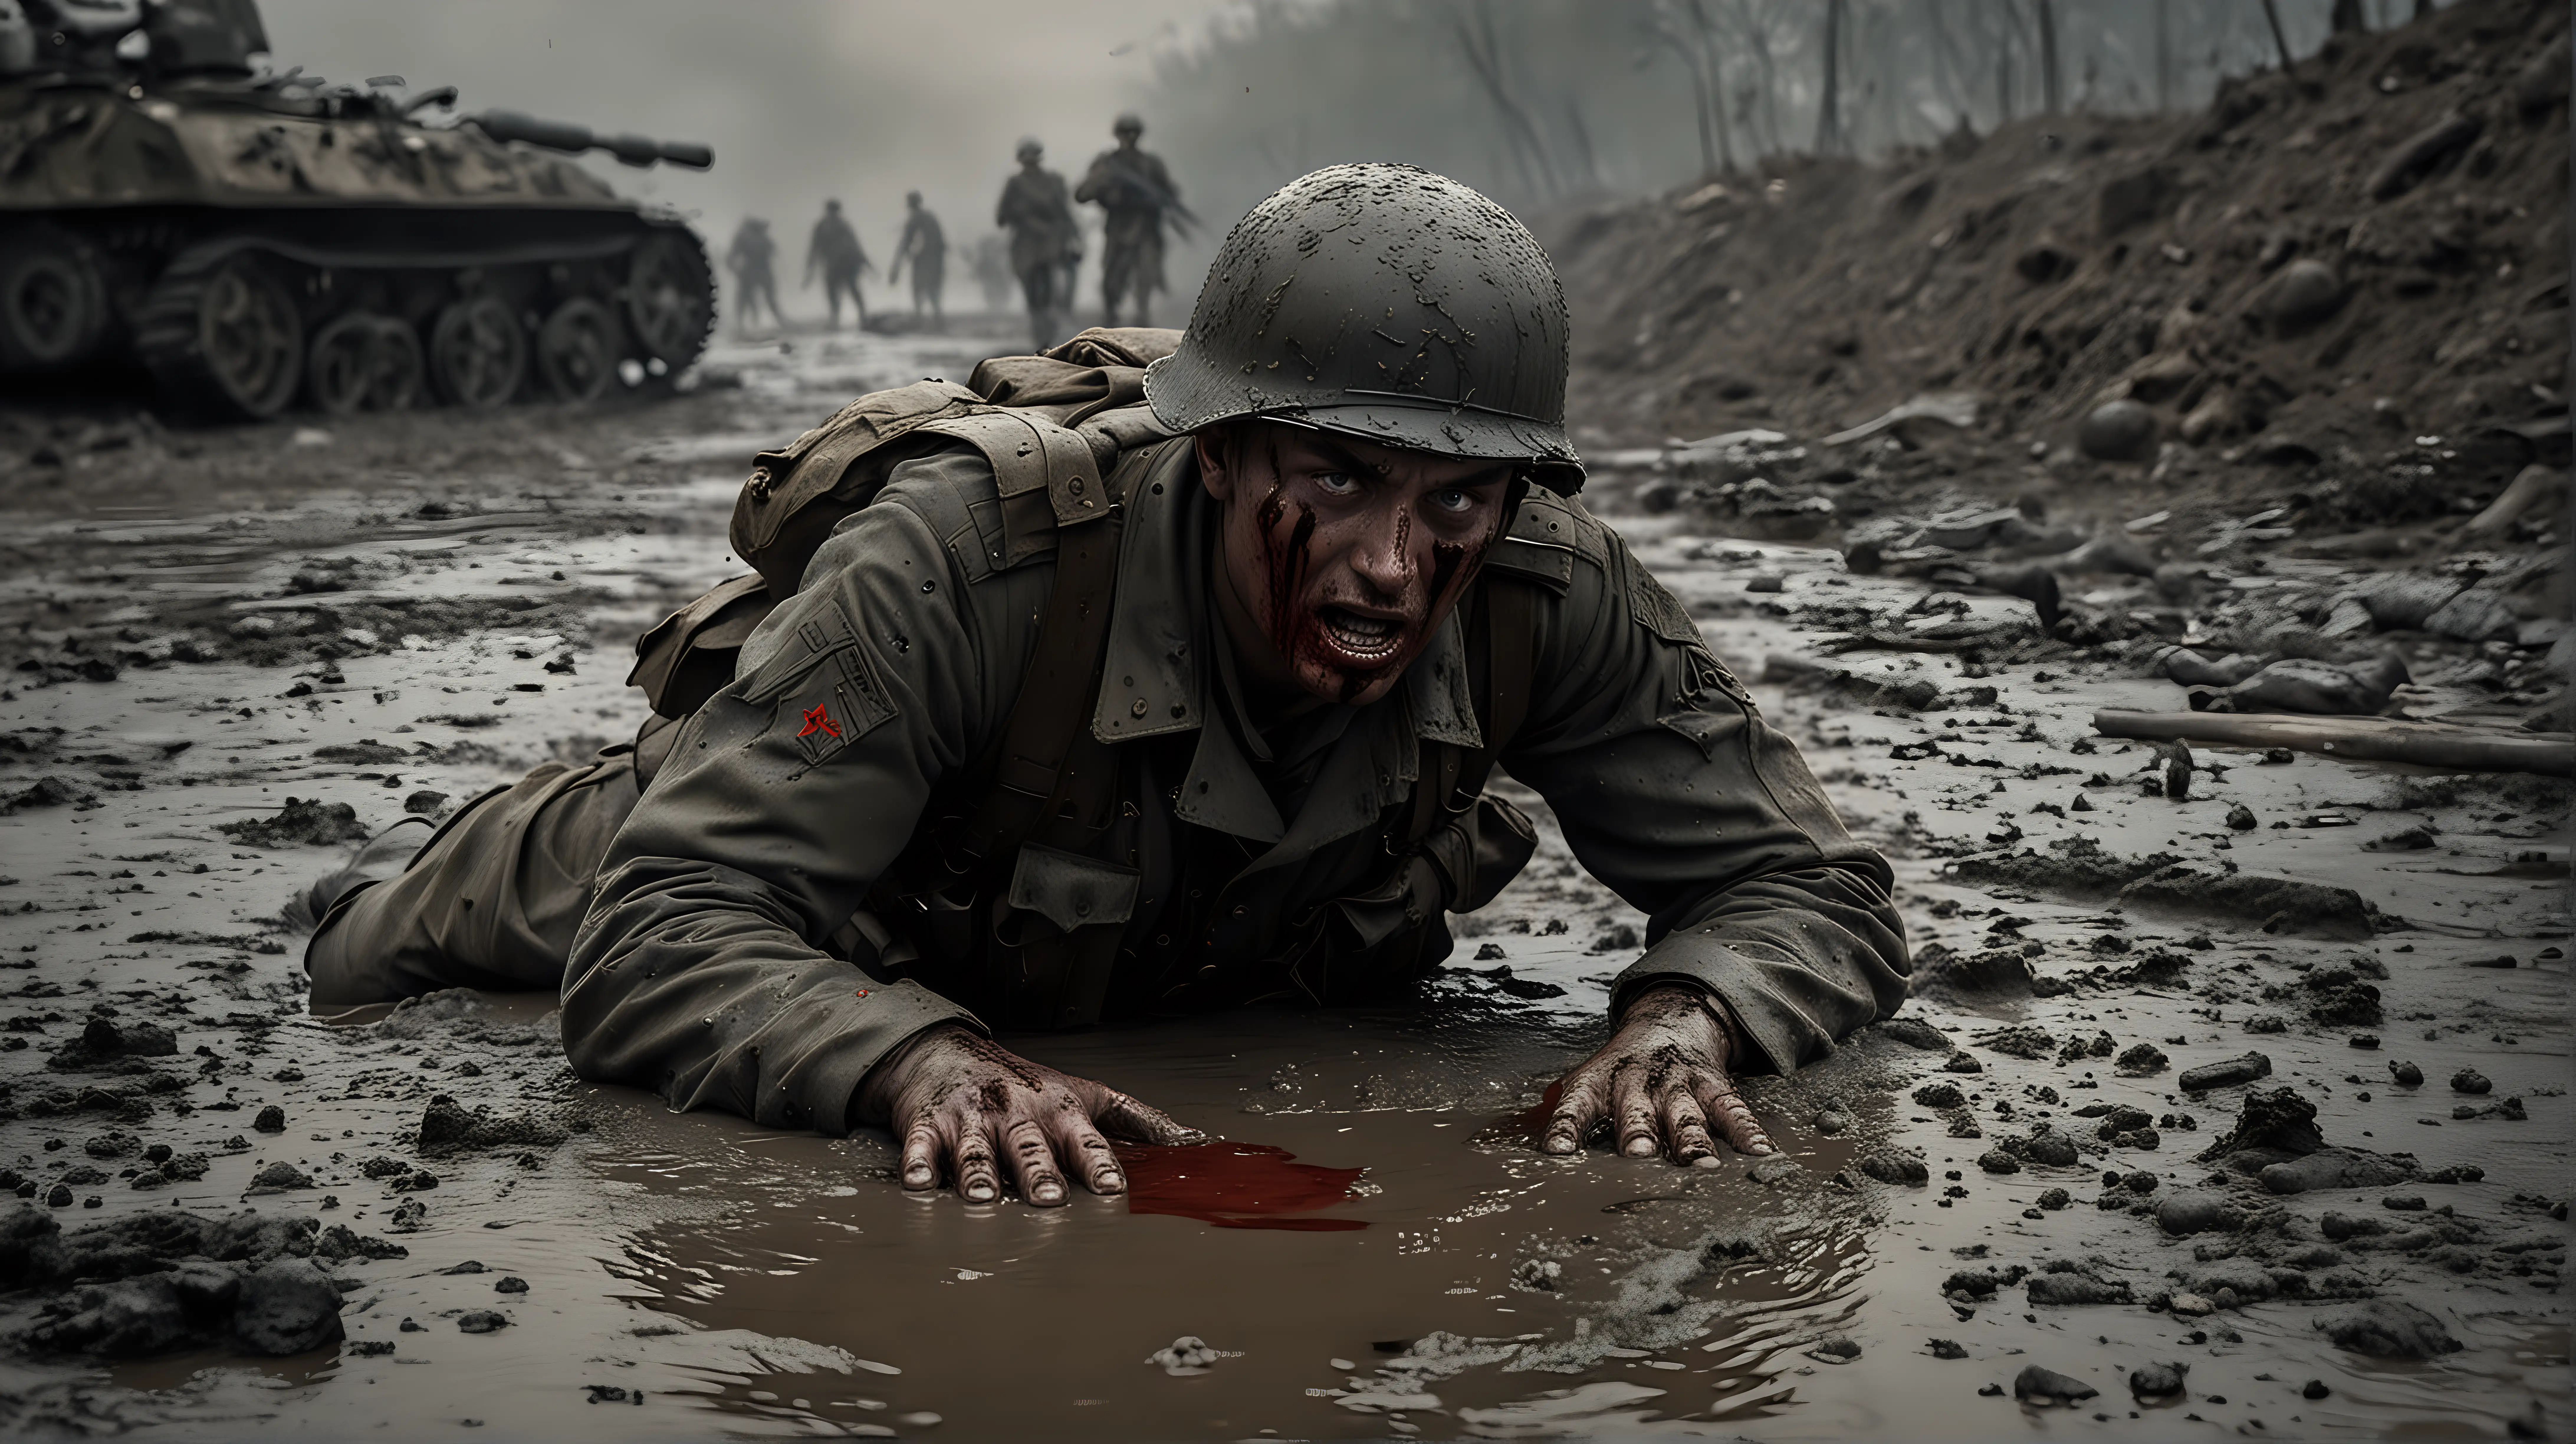 Generate a 4K hyperrealistic image depicting a soldier laying bloody in the mud water trying to crawl away from a tank that's position right behind him in World War I setttings as he writhing in pain as an enemy soldier stand behind him about to shoot him in the head. Ensure it's night time in a dark settings. Ensure the 3D rendering is highly detailed, showcasing the soldier's agonized expression and bloodied uniform.